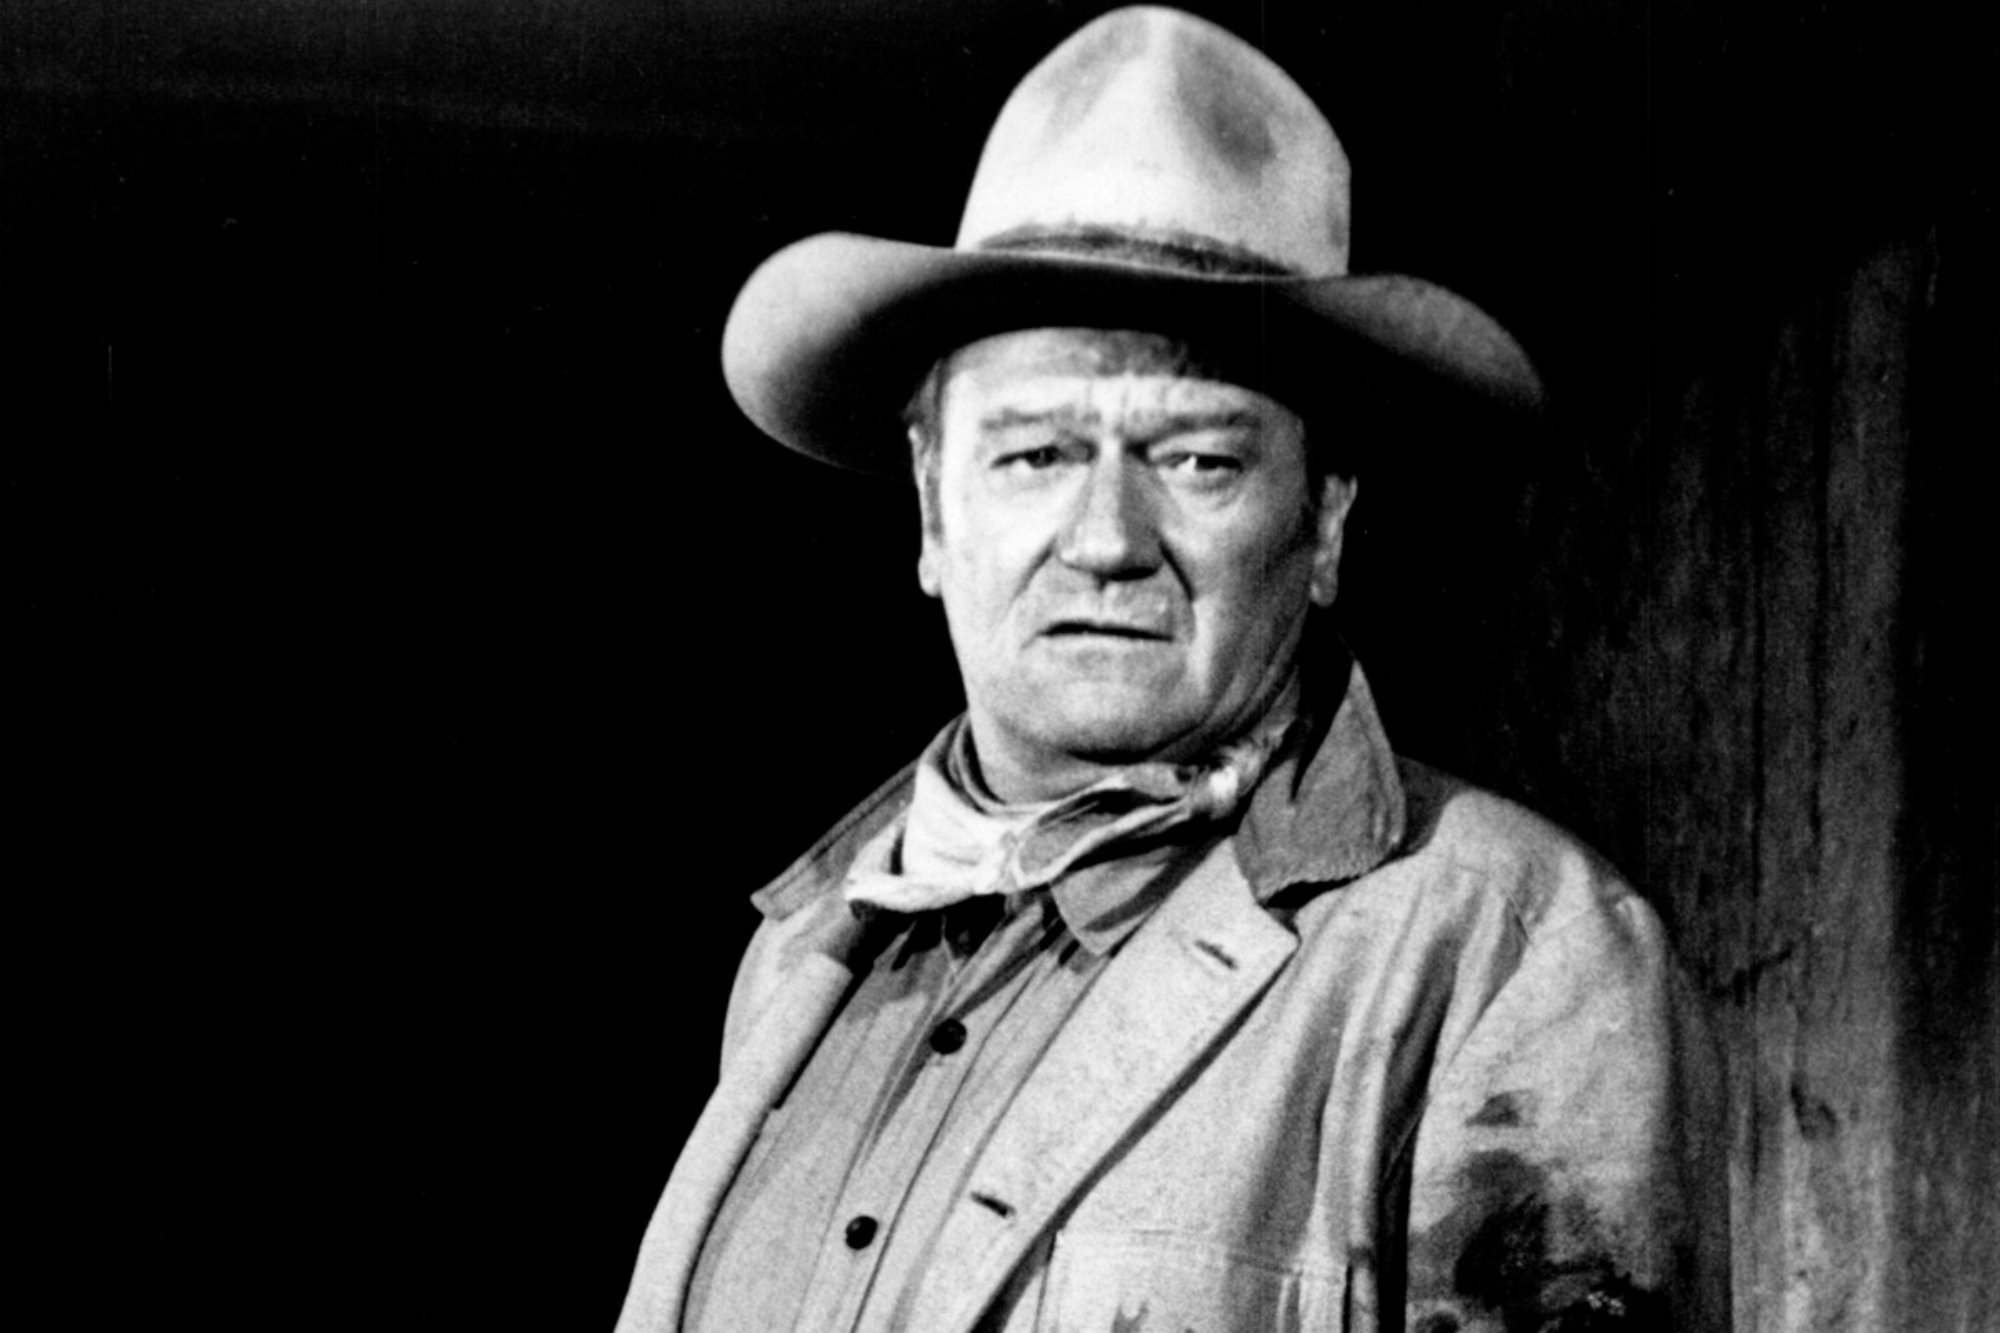 John Wayne, who starred in Western and war films. He has a serious look, wearing a Western costume.